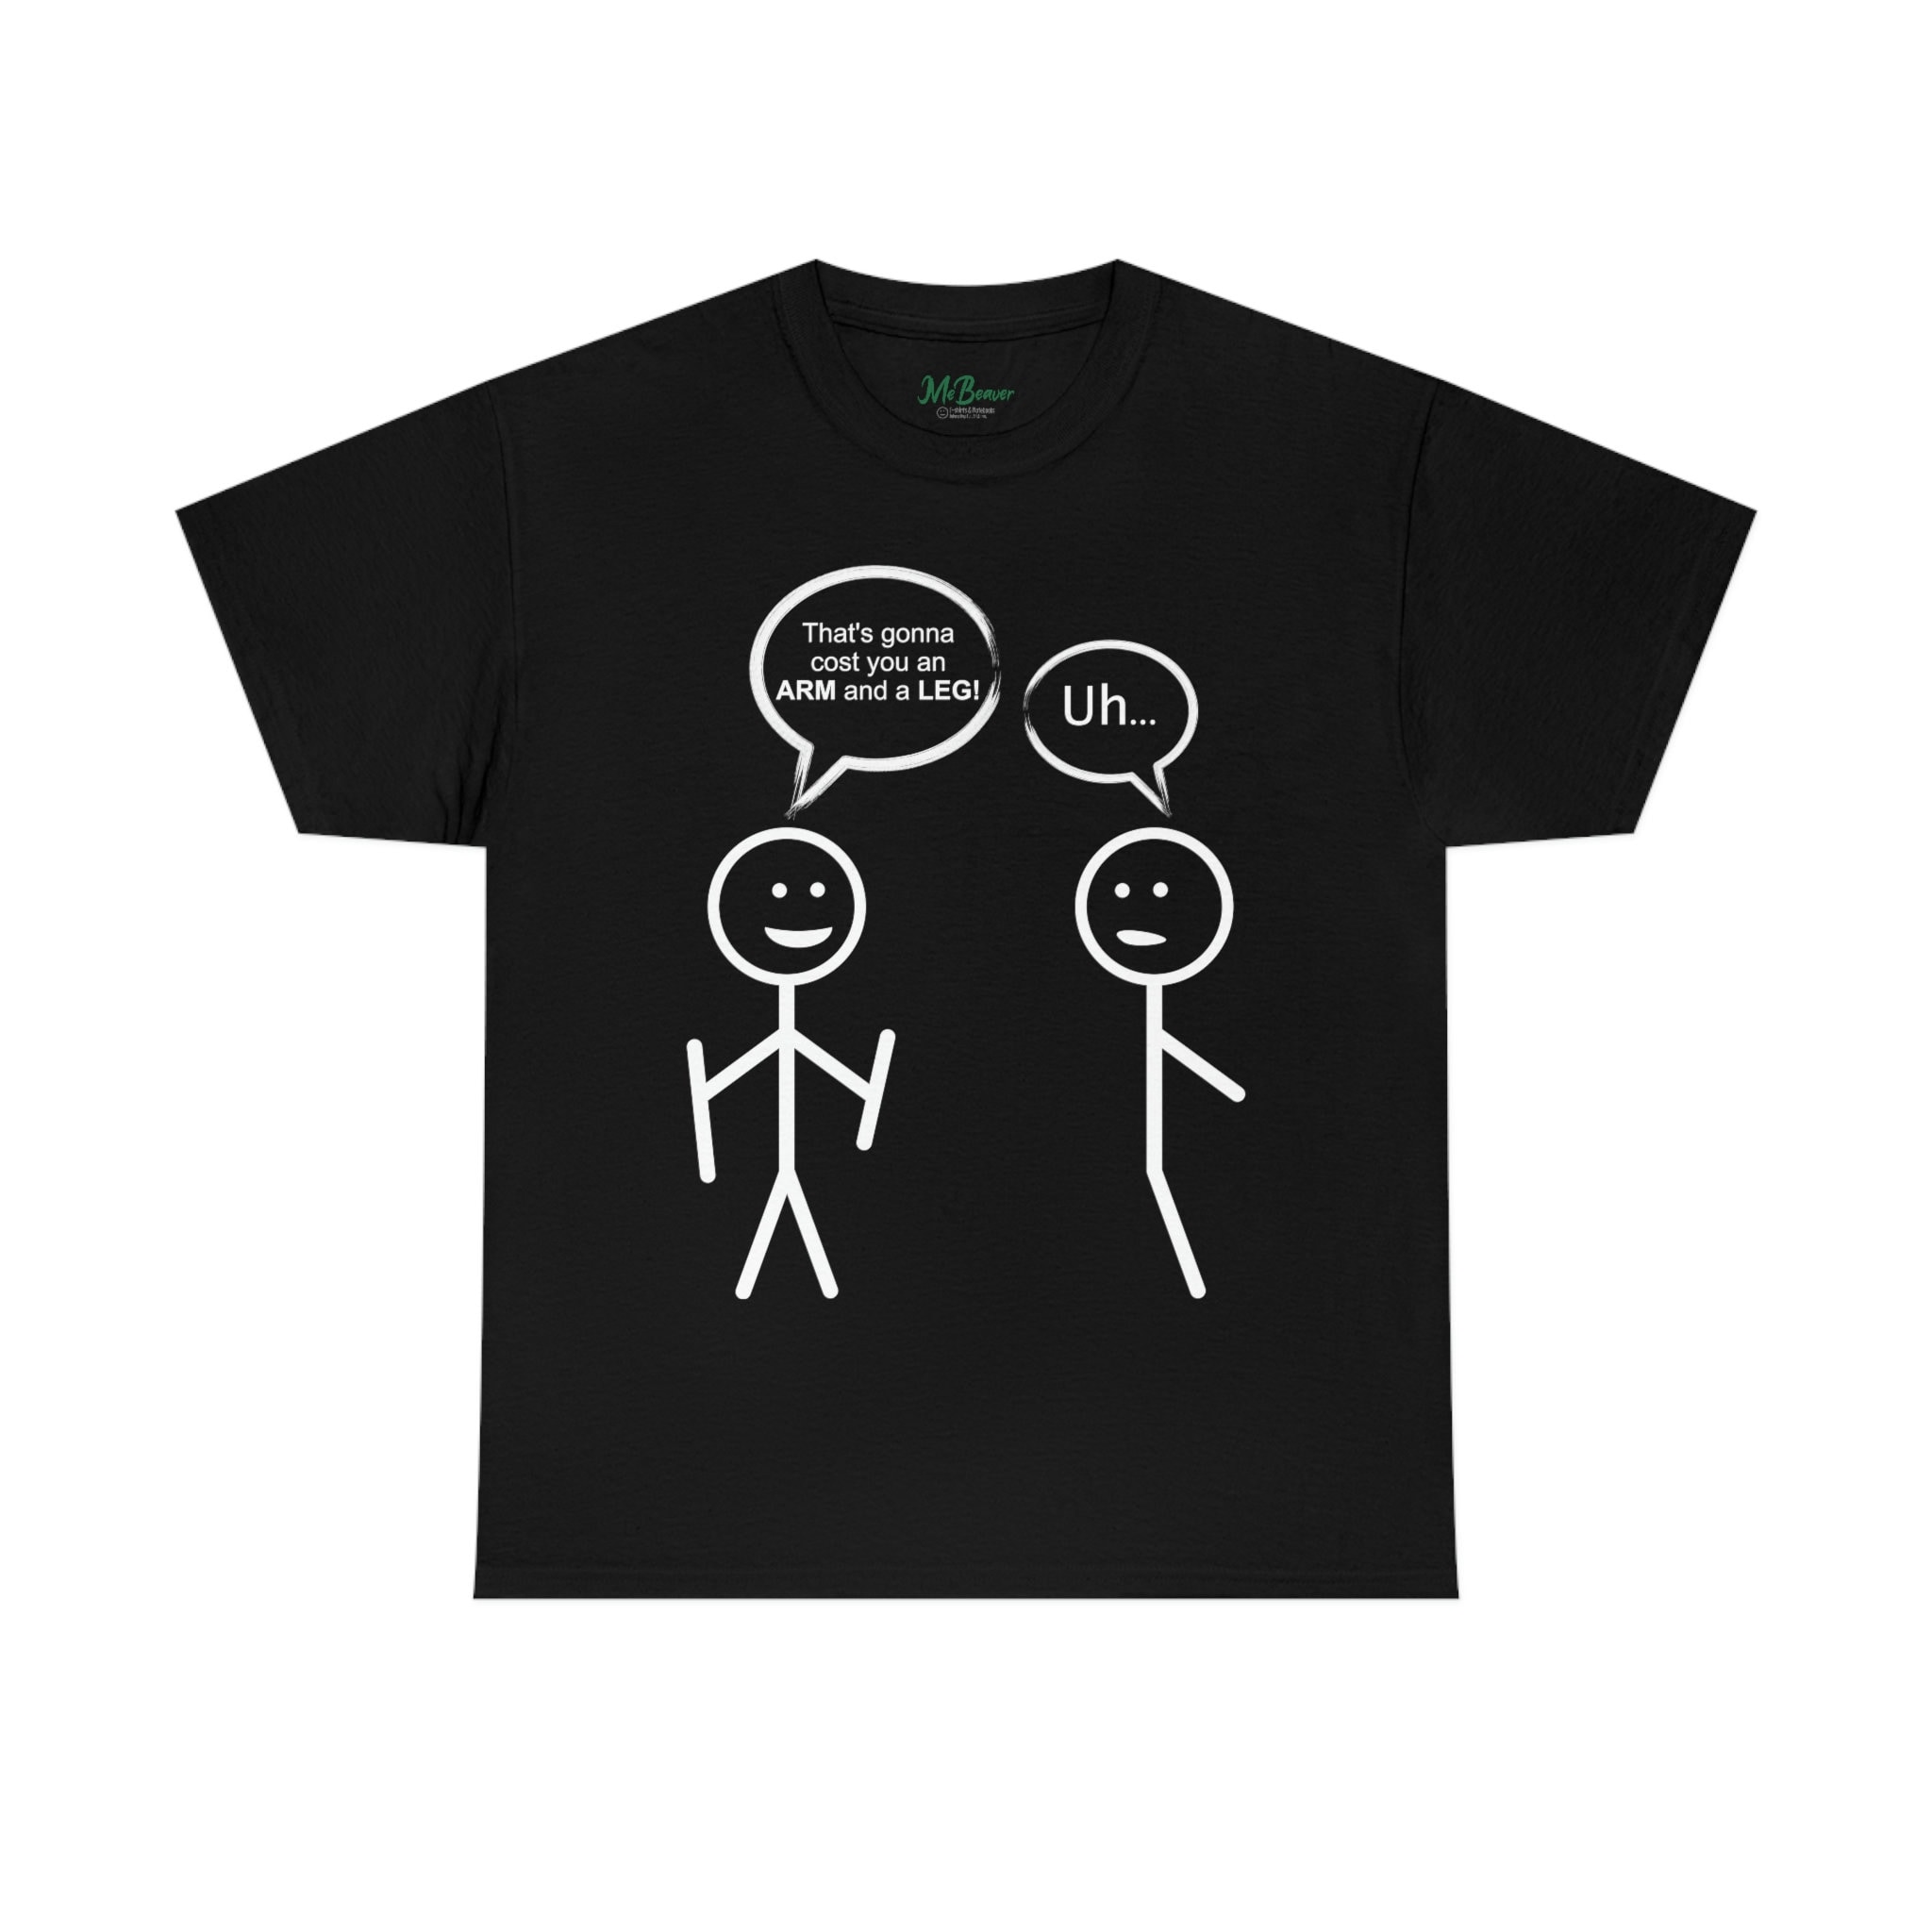 Armed Robbery - Funny Stickman Memes Men's T-Shirt